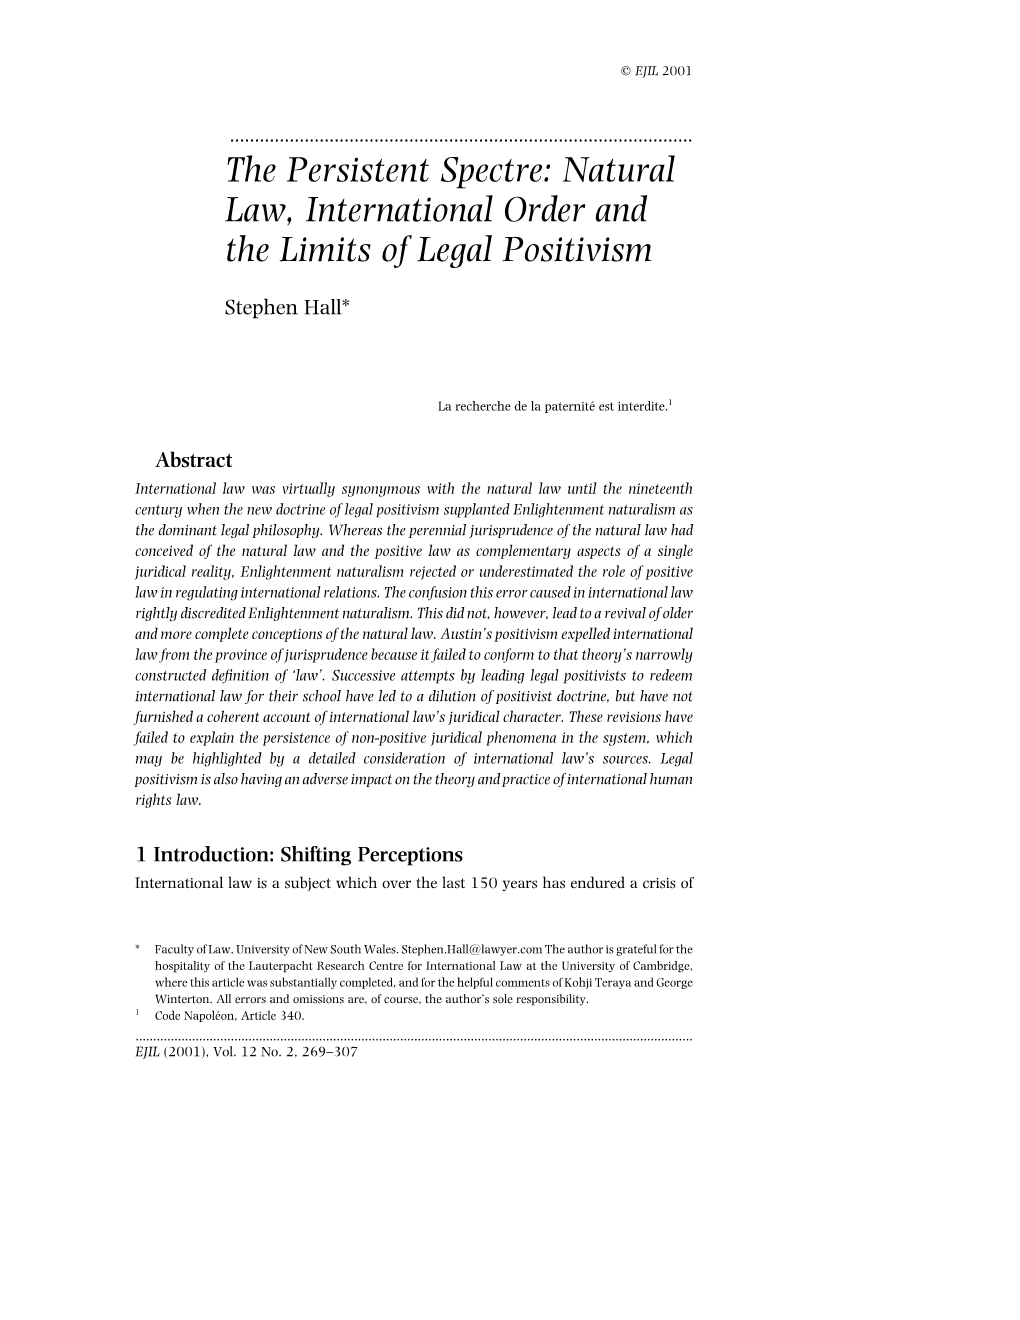 The Persistent Spectre: Natural Law, International Order and the Limits of Legal Positivism